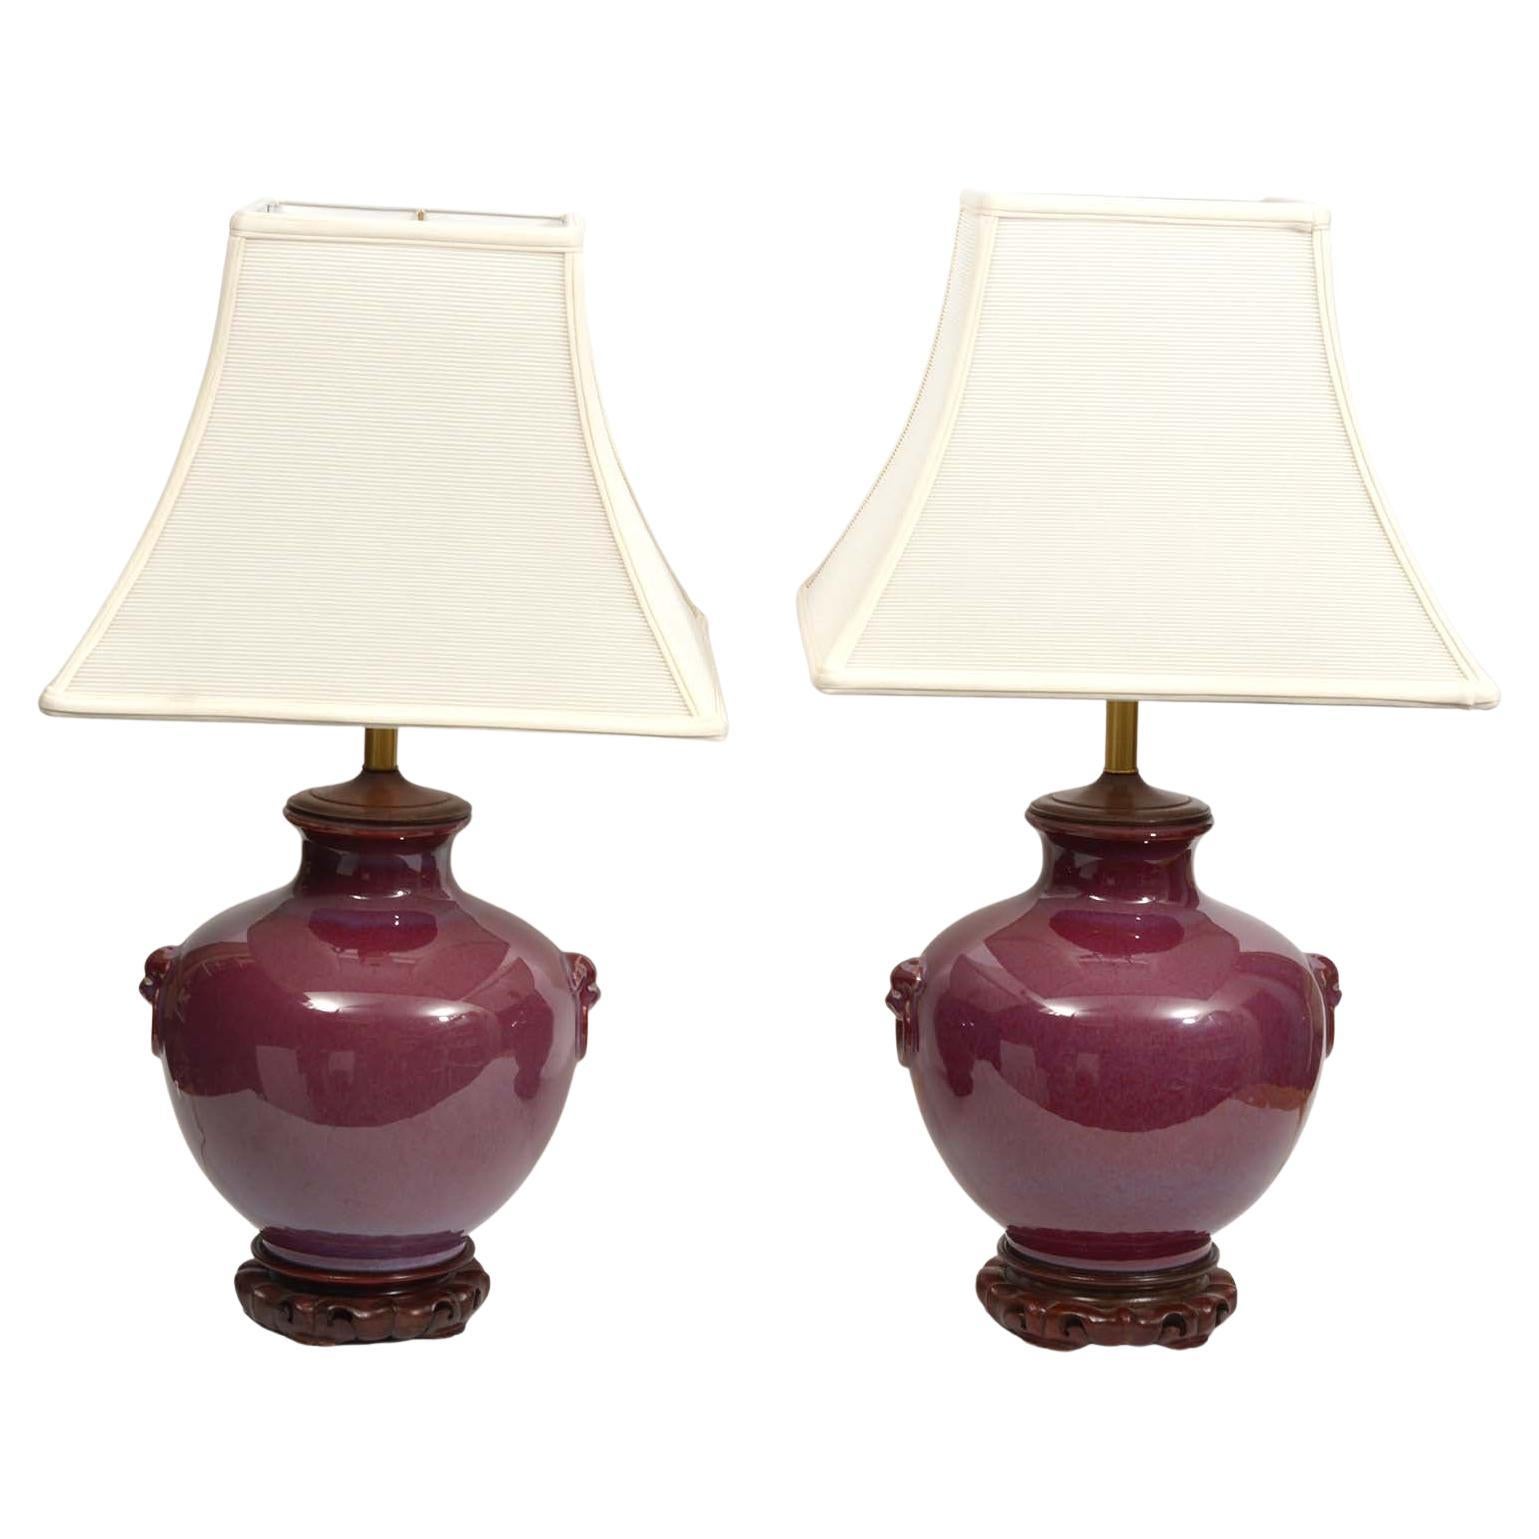 Pair of Chinese Oxblood Glazed Urn Shaped Table Lamps with Haut Relief, 20th C